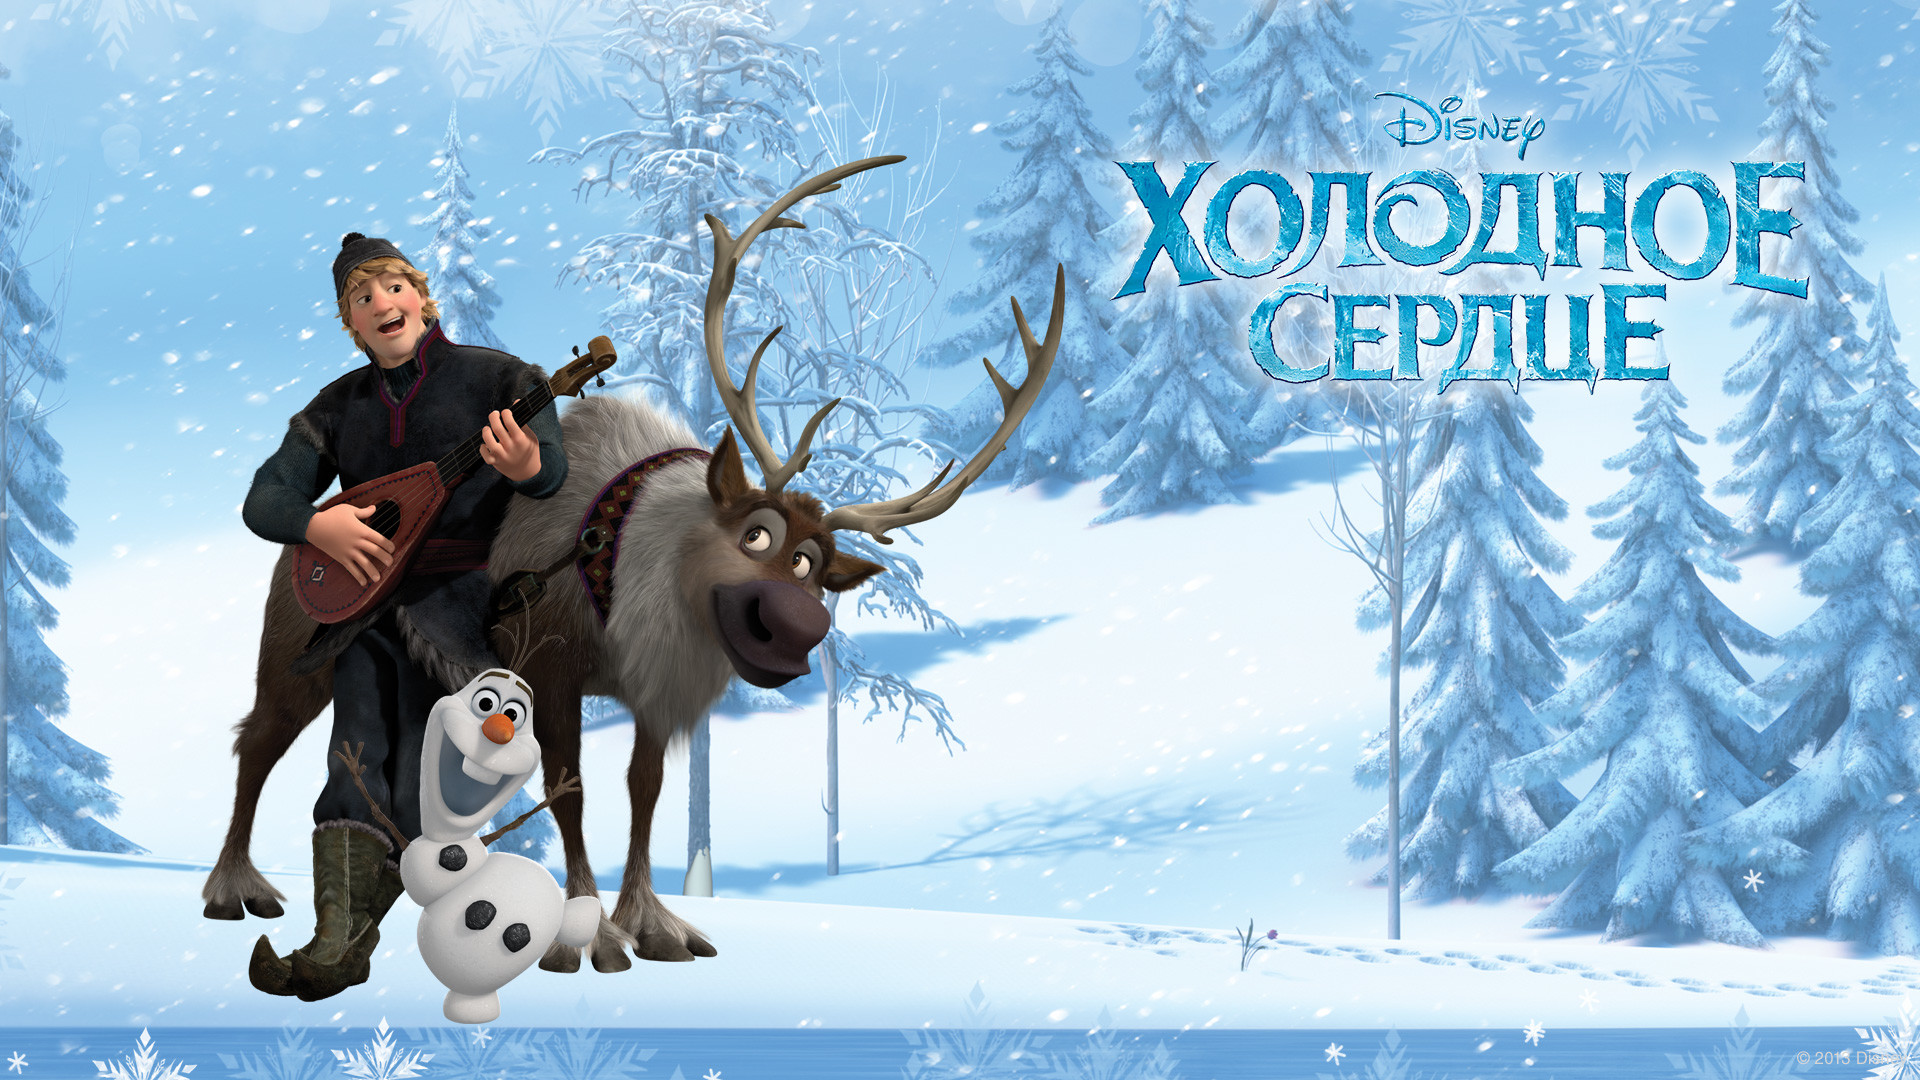 1920x1080 Frozen Russian Wallpapers Olaf and Sven Wallpaper 36252719 